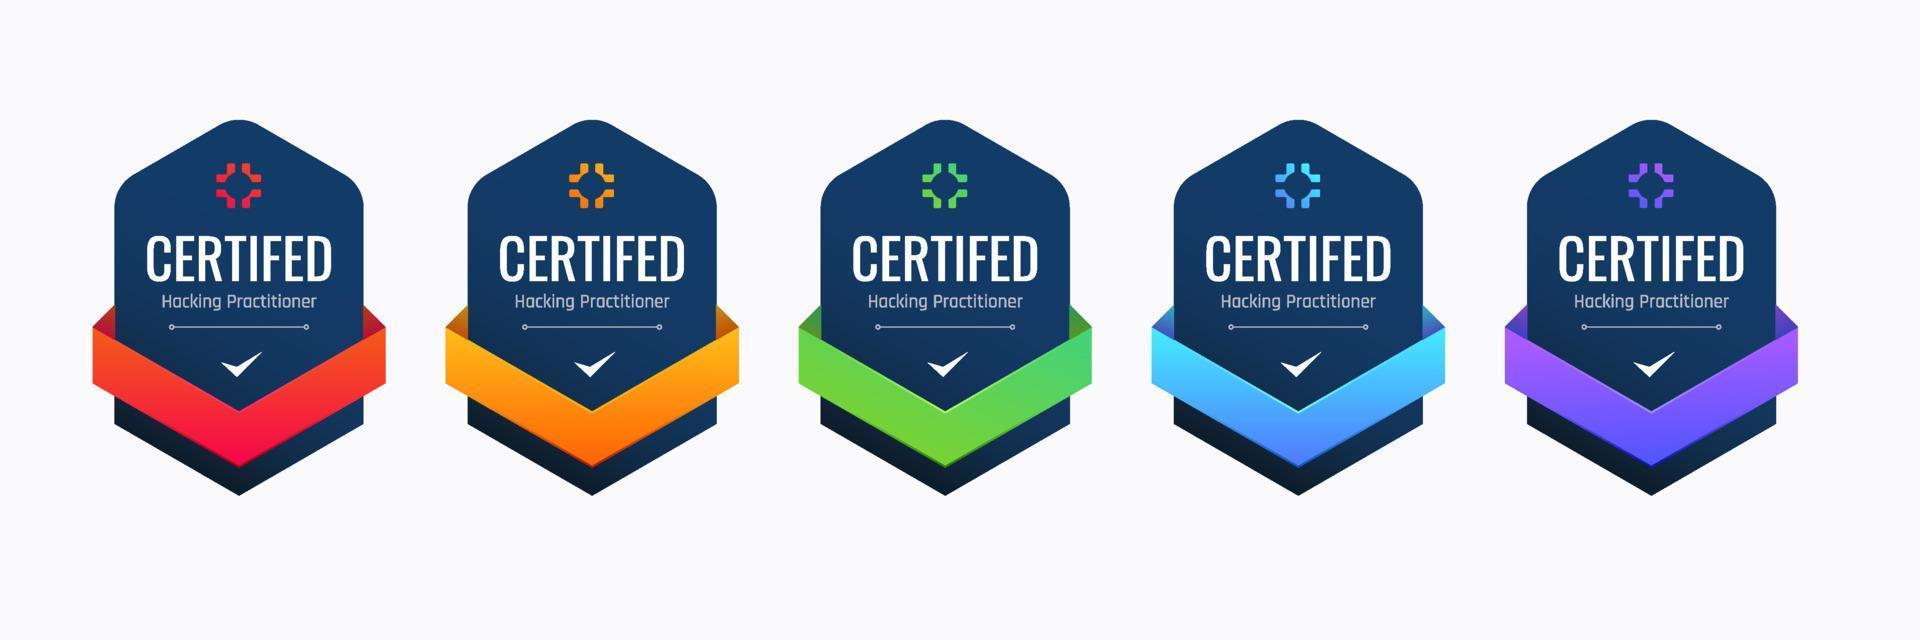 Certified Badge Design for Hacking Practitioner. Professional Computer Security Certifications Based on Criteria. vector